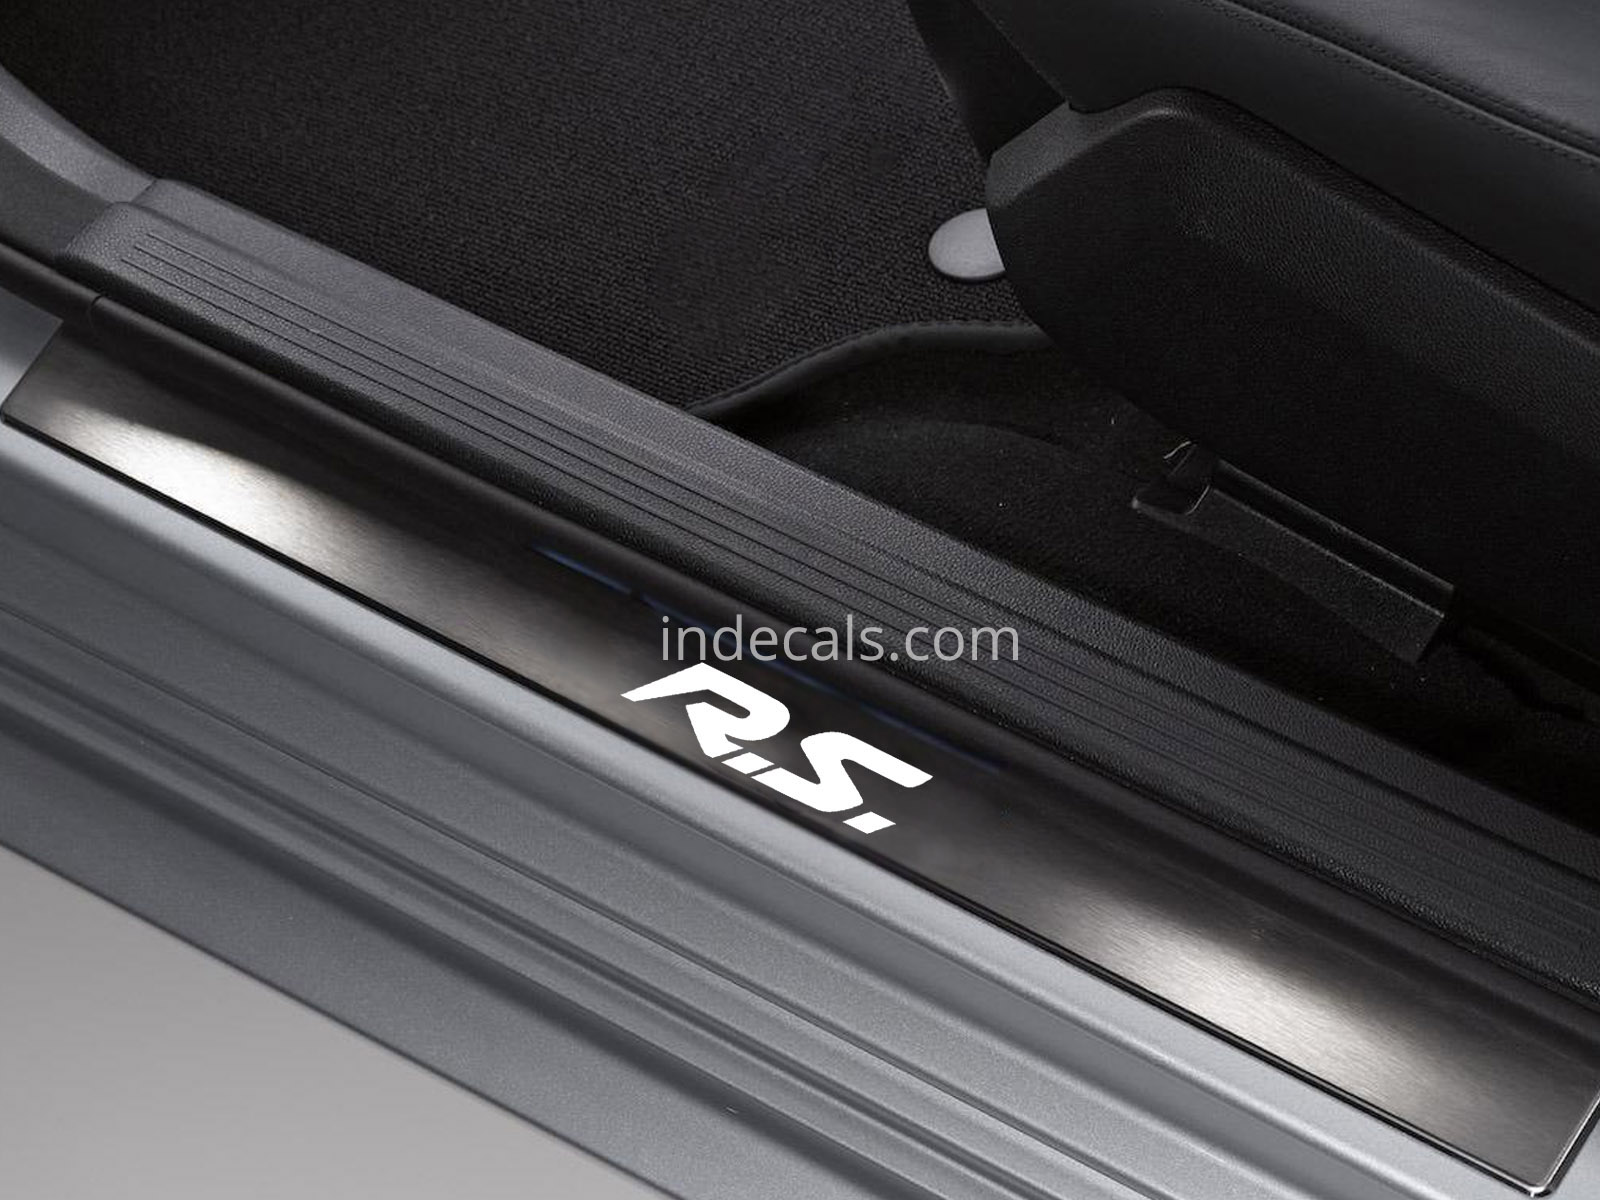 6 x Renault RS Stickers for Door Sills - White